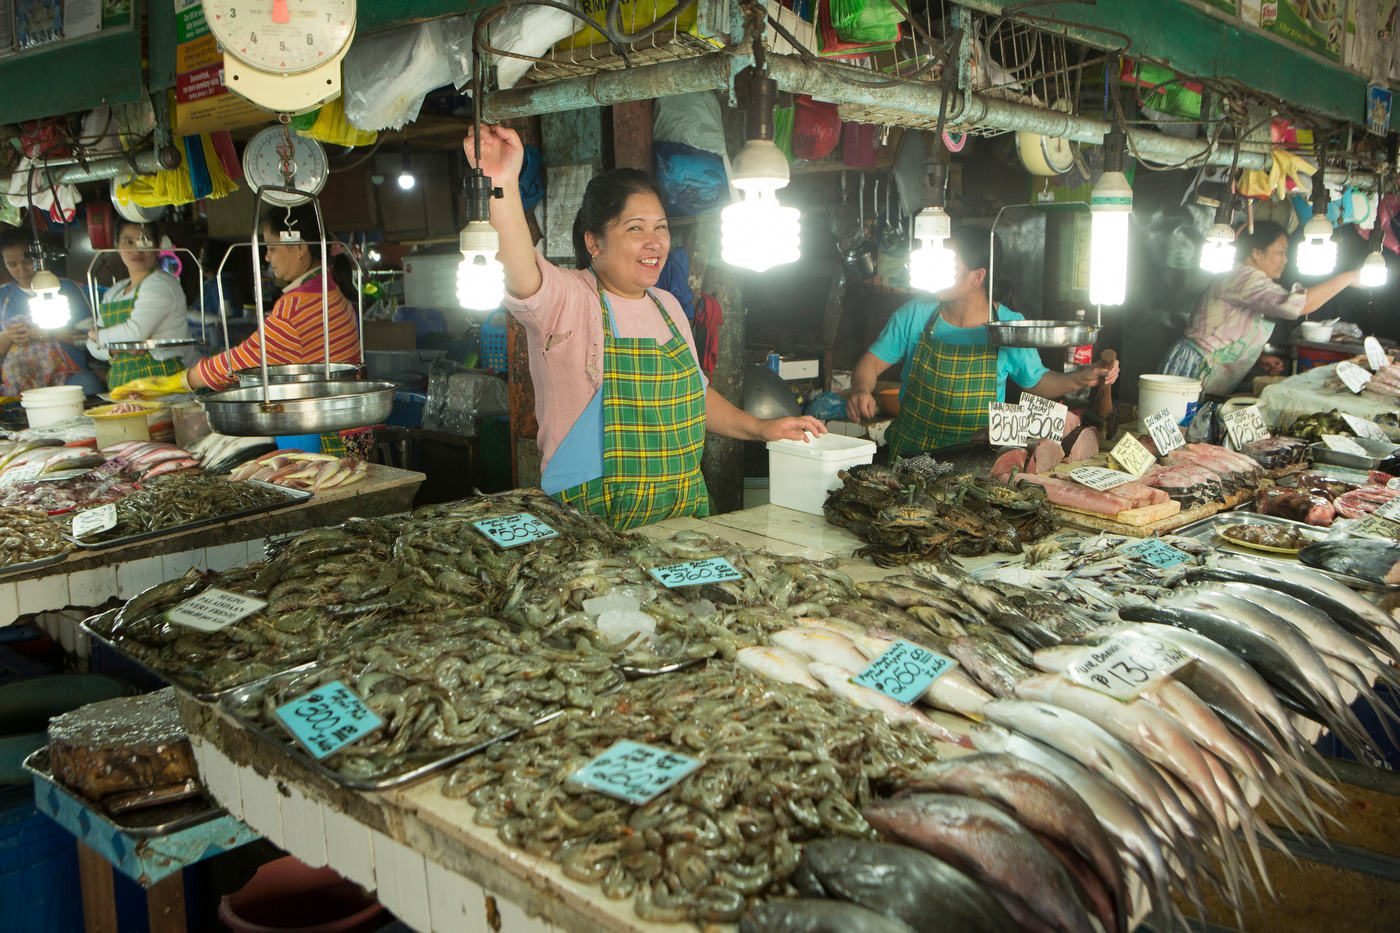 Fish mongers at the Maharlika Market in Baguio, Philippines, for The Travel Channel.